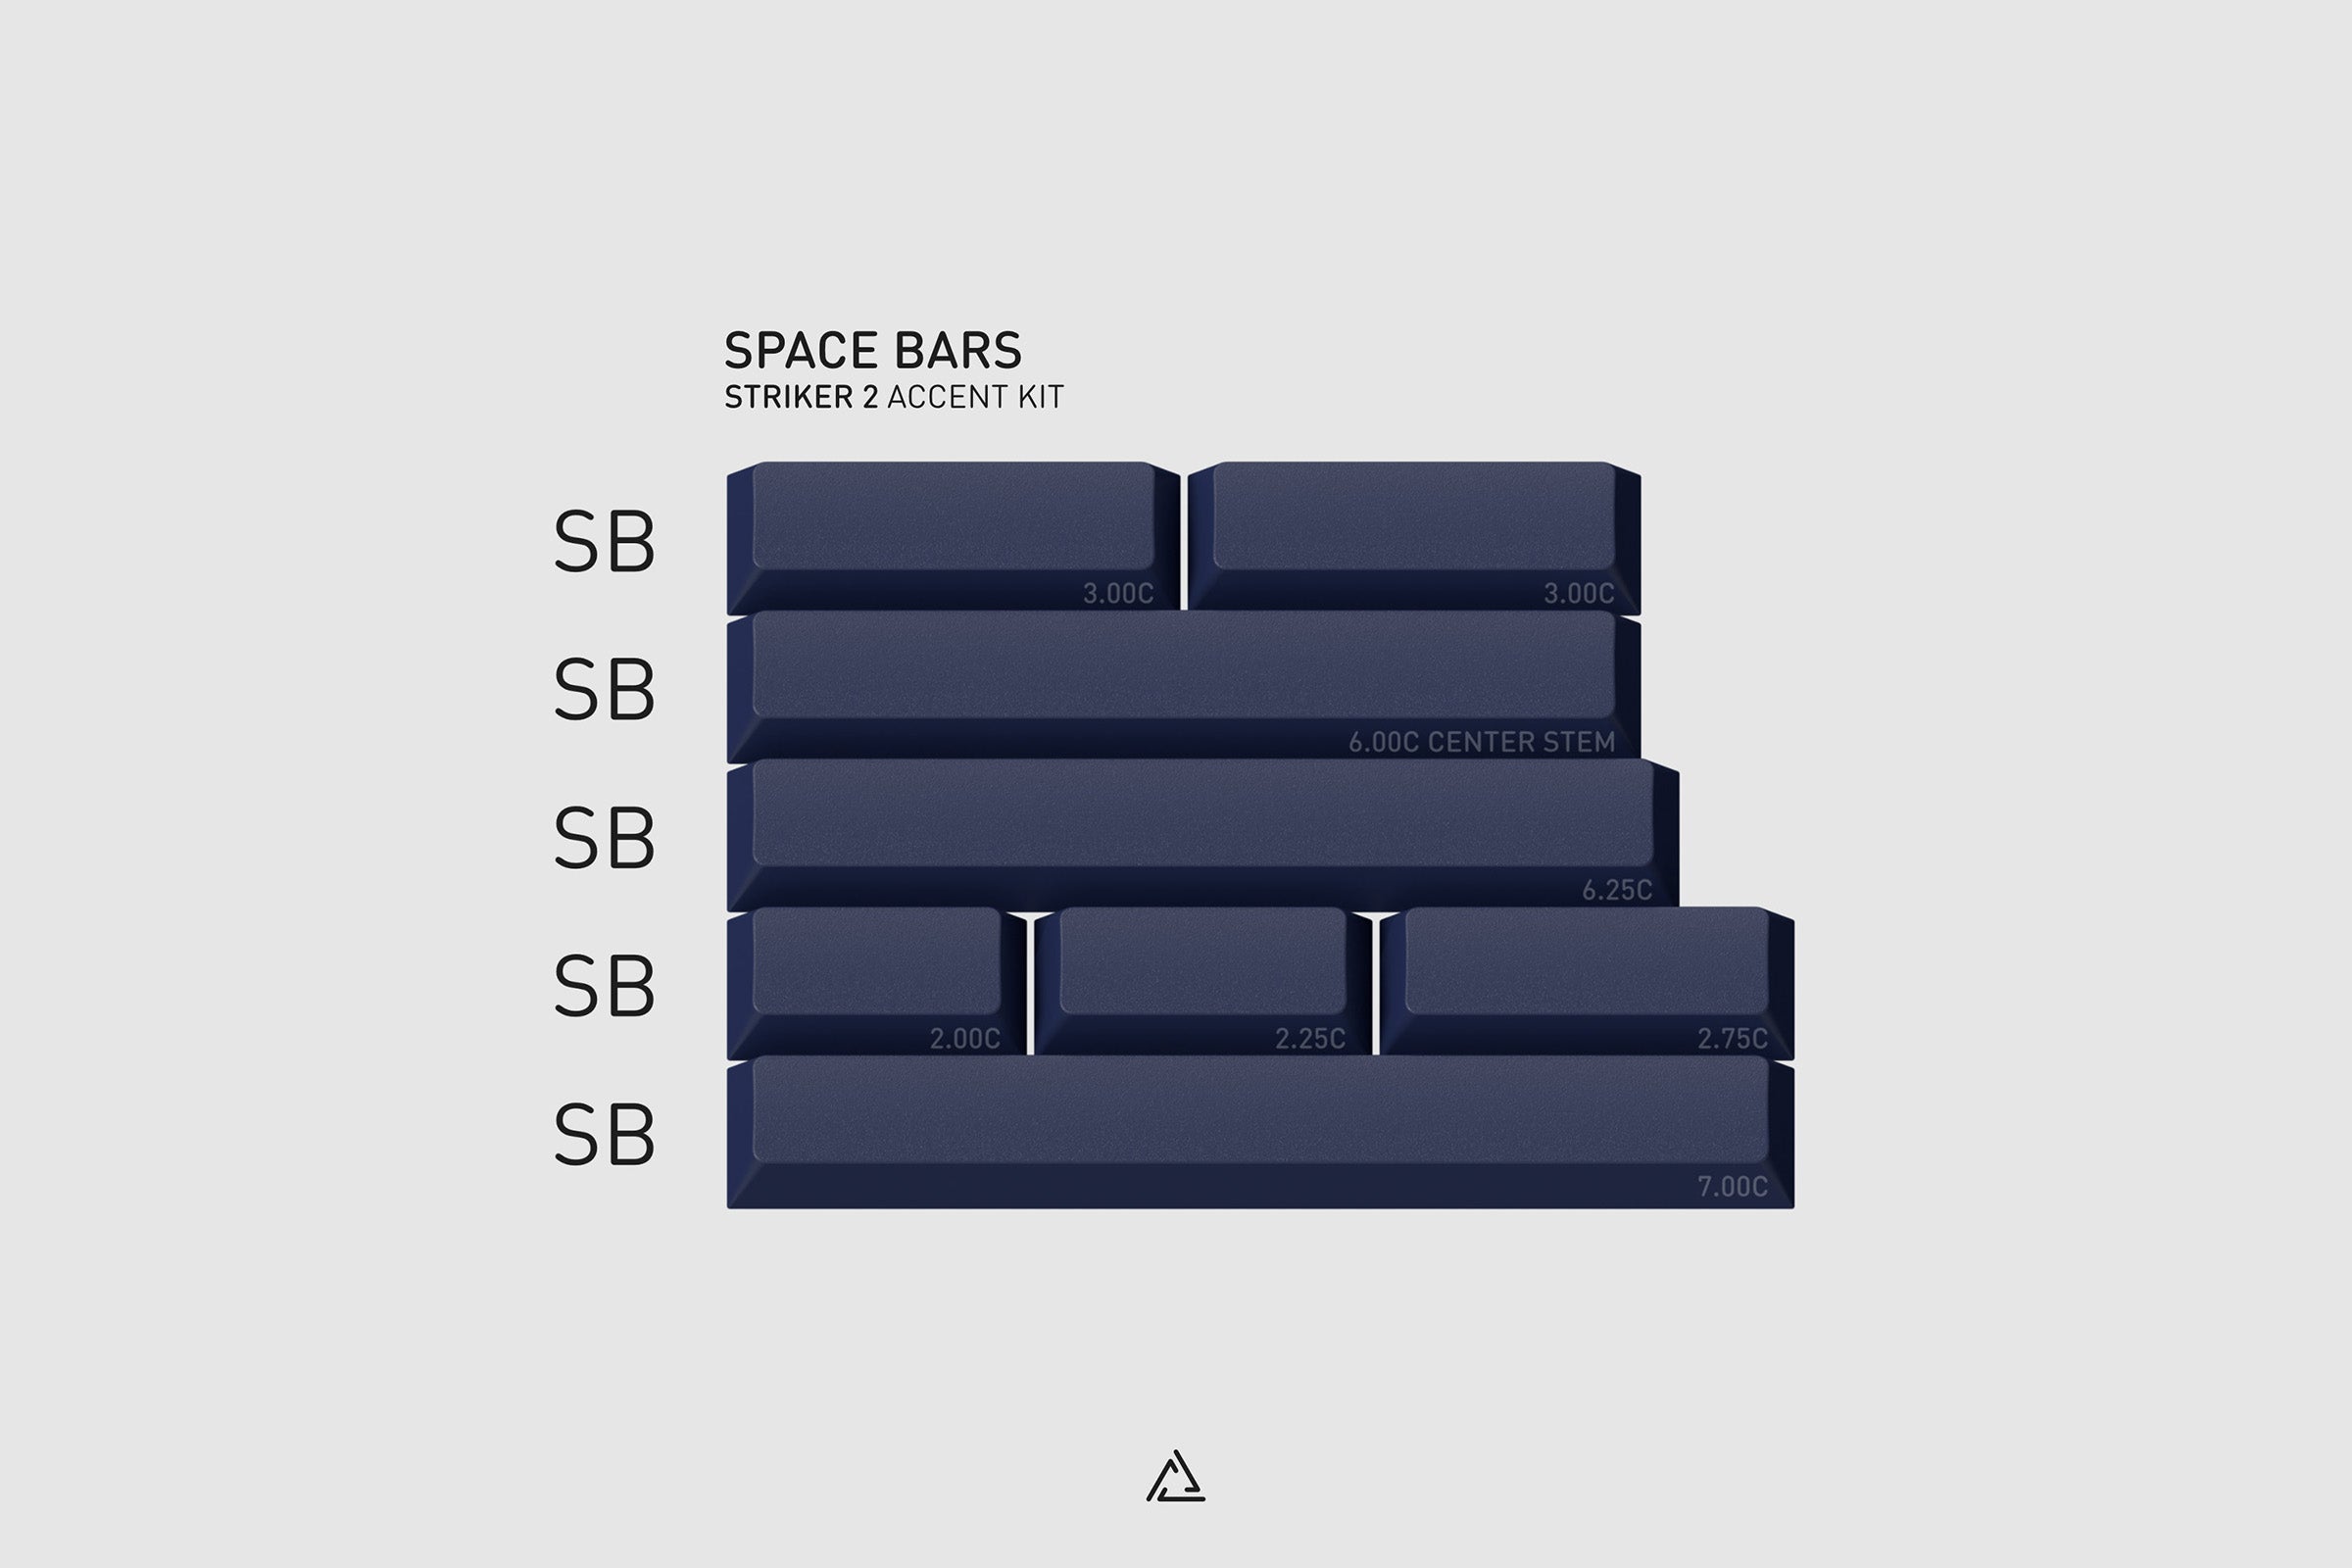 GMK Striker 2 Space Bars: The Space Bars kit includes accent space keys from 2.00C to 7.00C for both standard, and split keyboards.